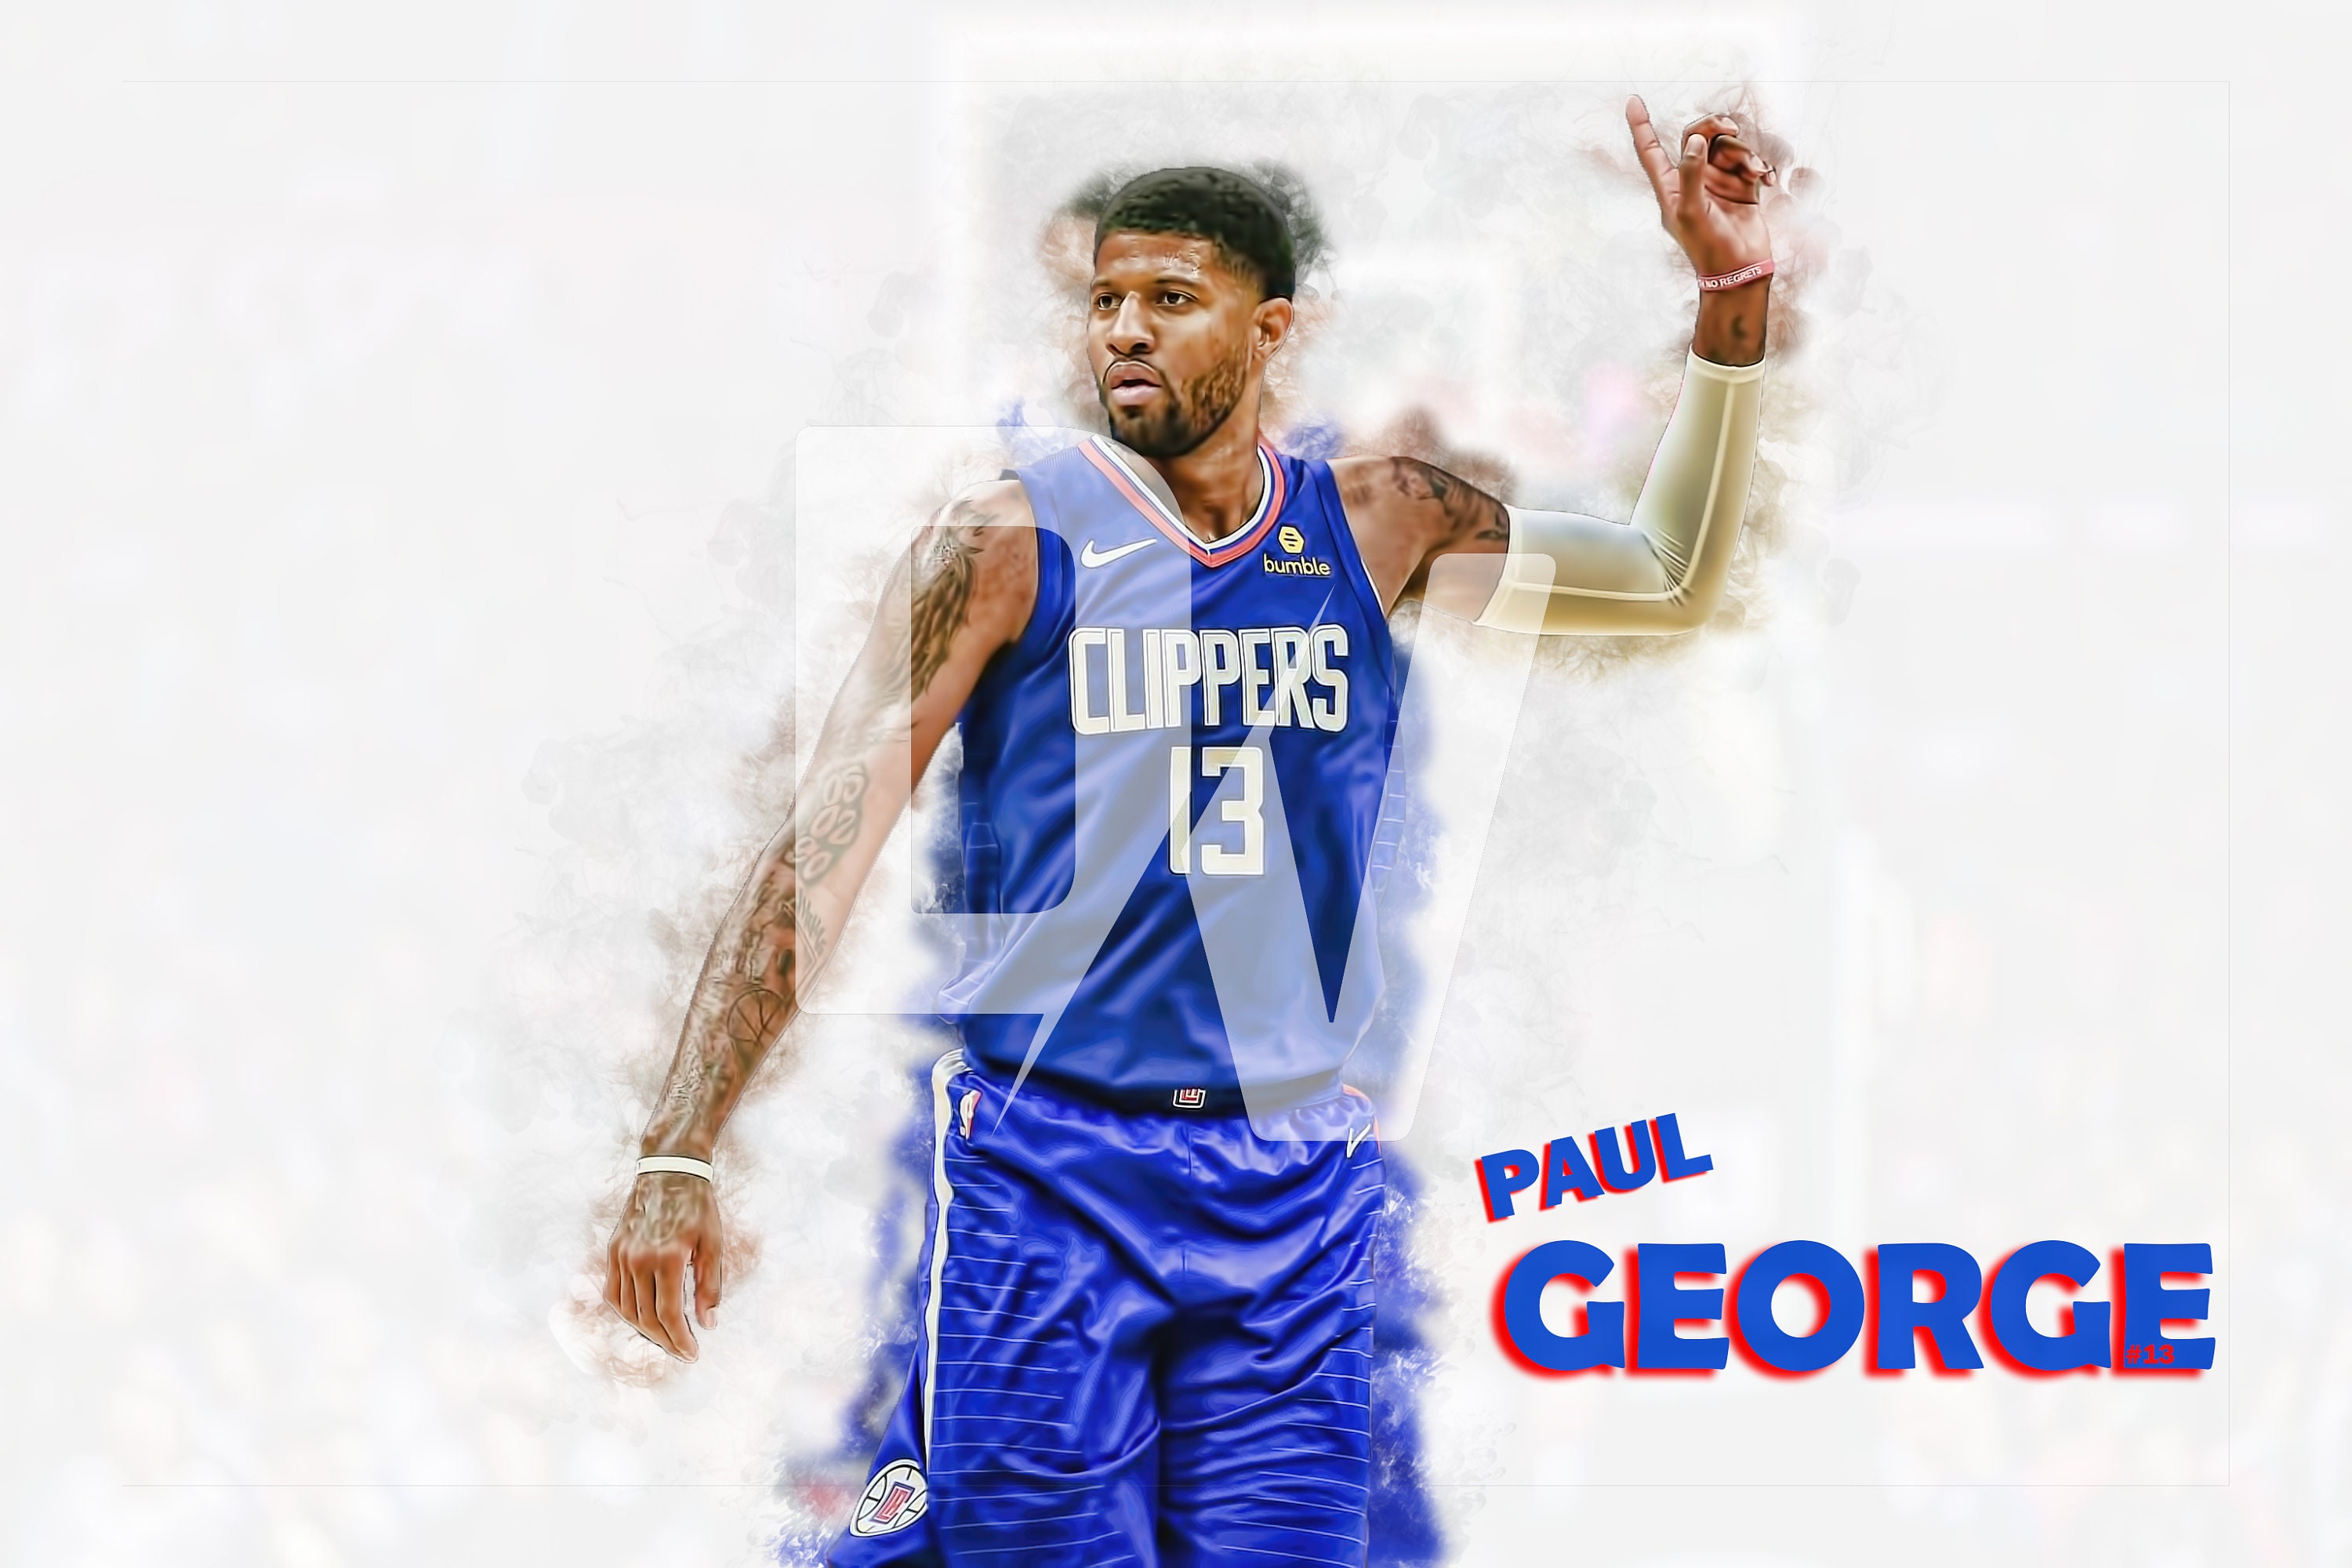  PAUL GEORGE INDIANA PACERS 8X10 SPORTS ACTION PHOTO (X) :  Sports Fan Photographs : Sports & Outdoors